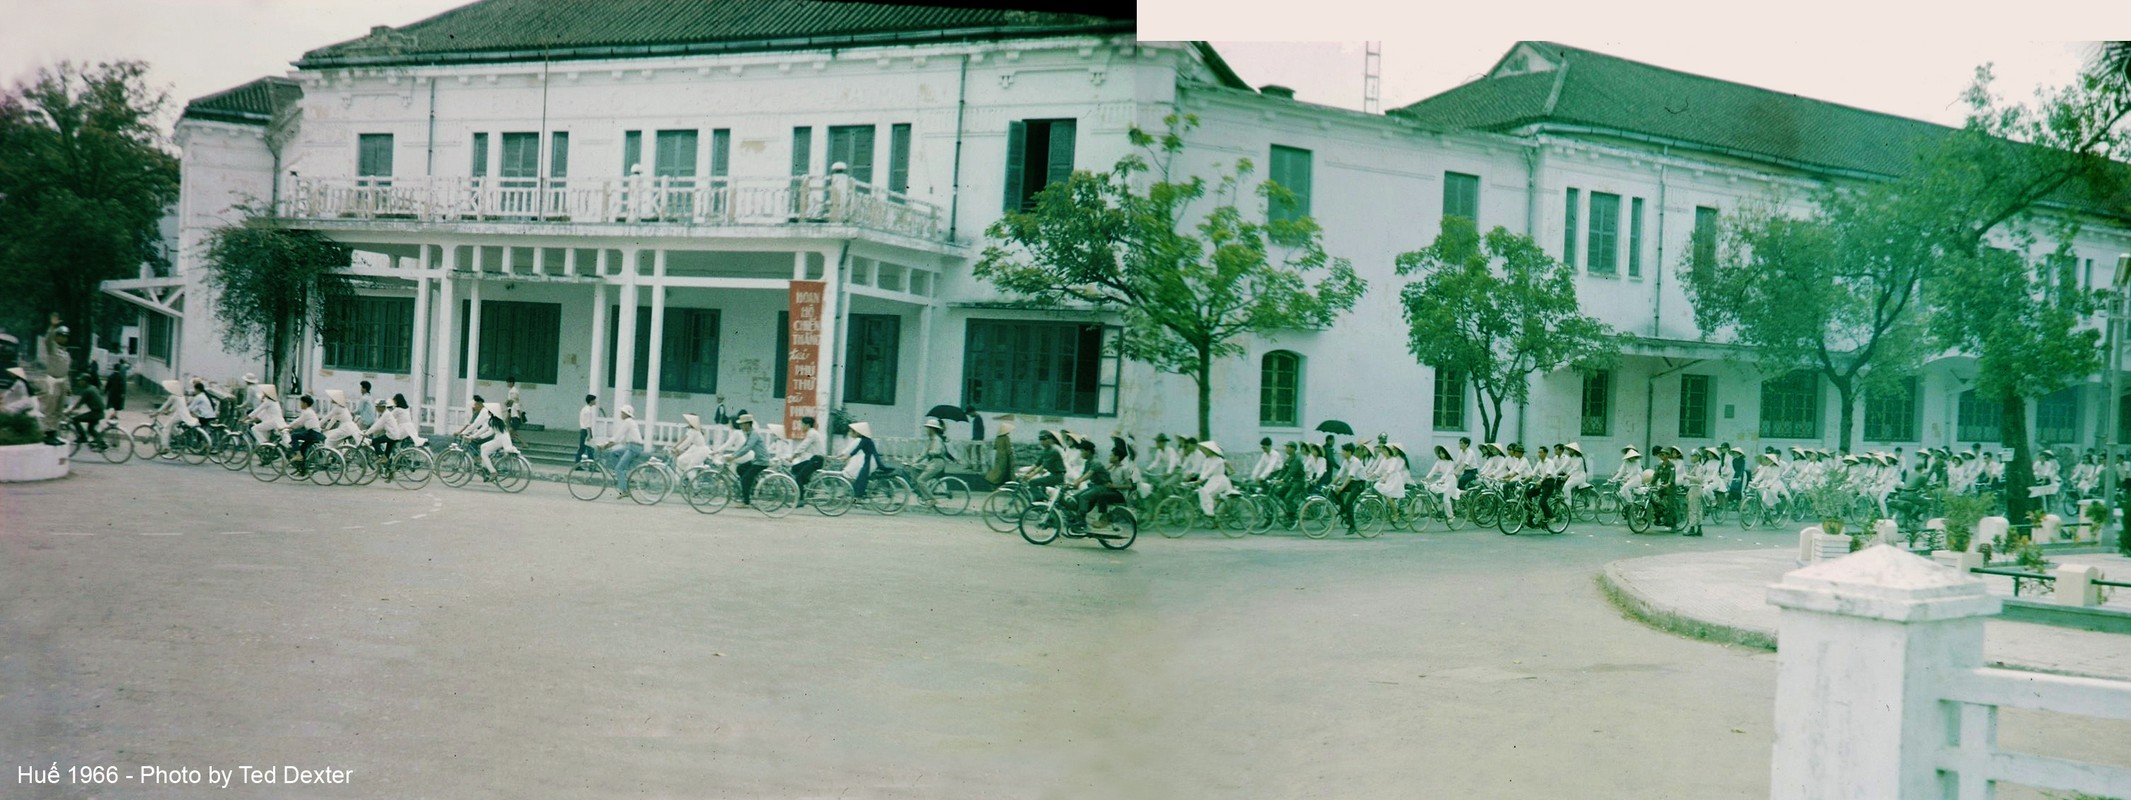 Anh an tuong ve Hue nam 1966 cua Ted Dexter (2)-Hinh-16